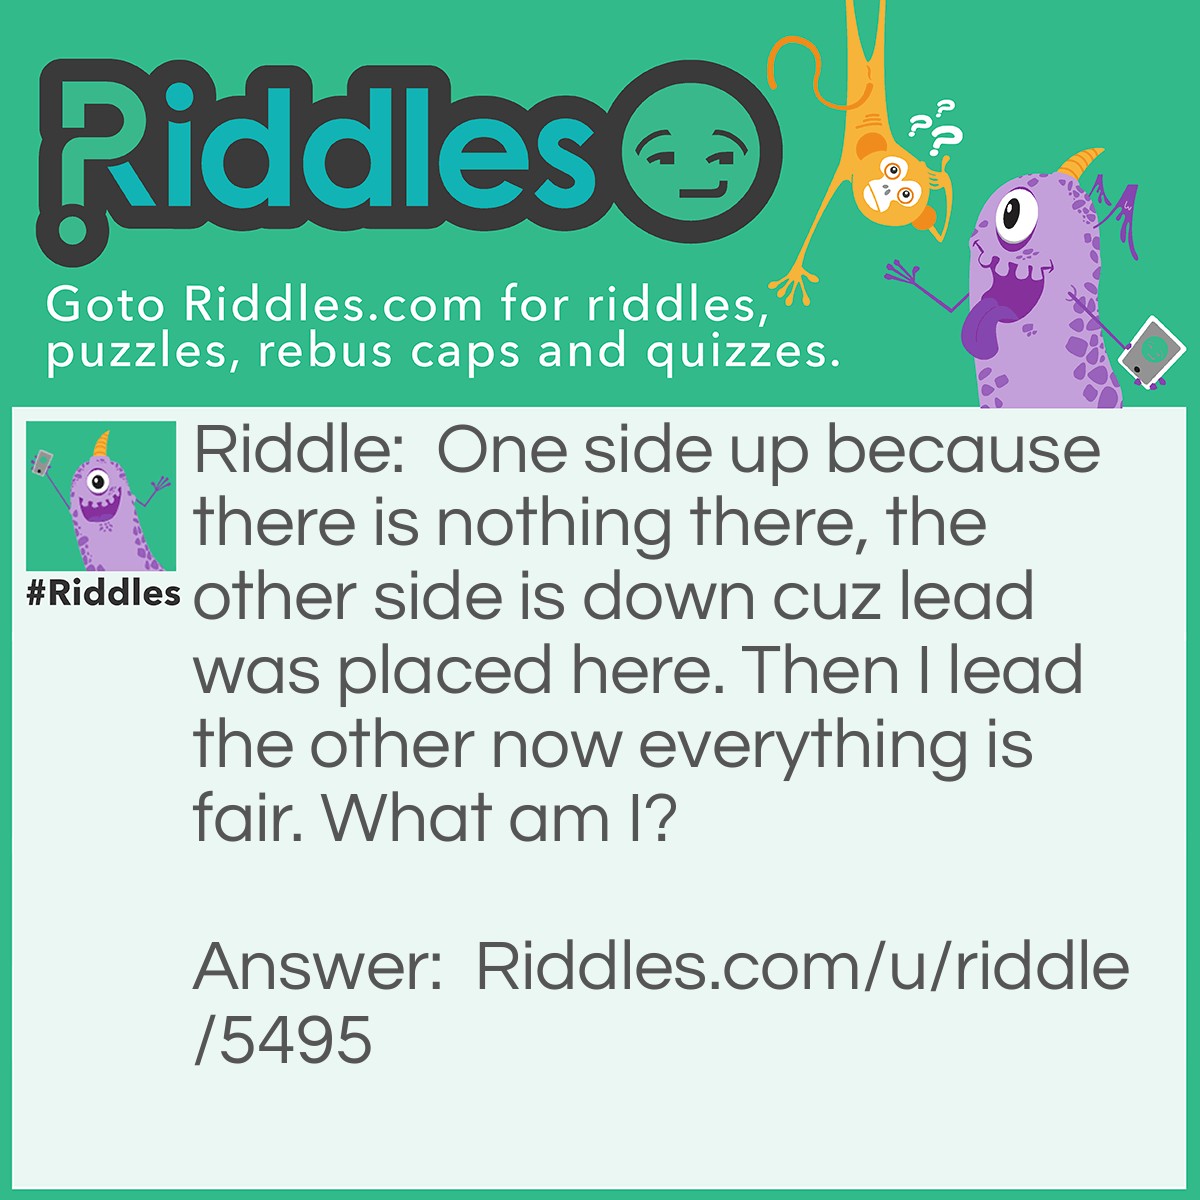 Riddle: One side up because there is nothing there, the other side is down cuz lead was placed here. Then I lead the other now everything is fair. What am I? Answer: Scale/balance.